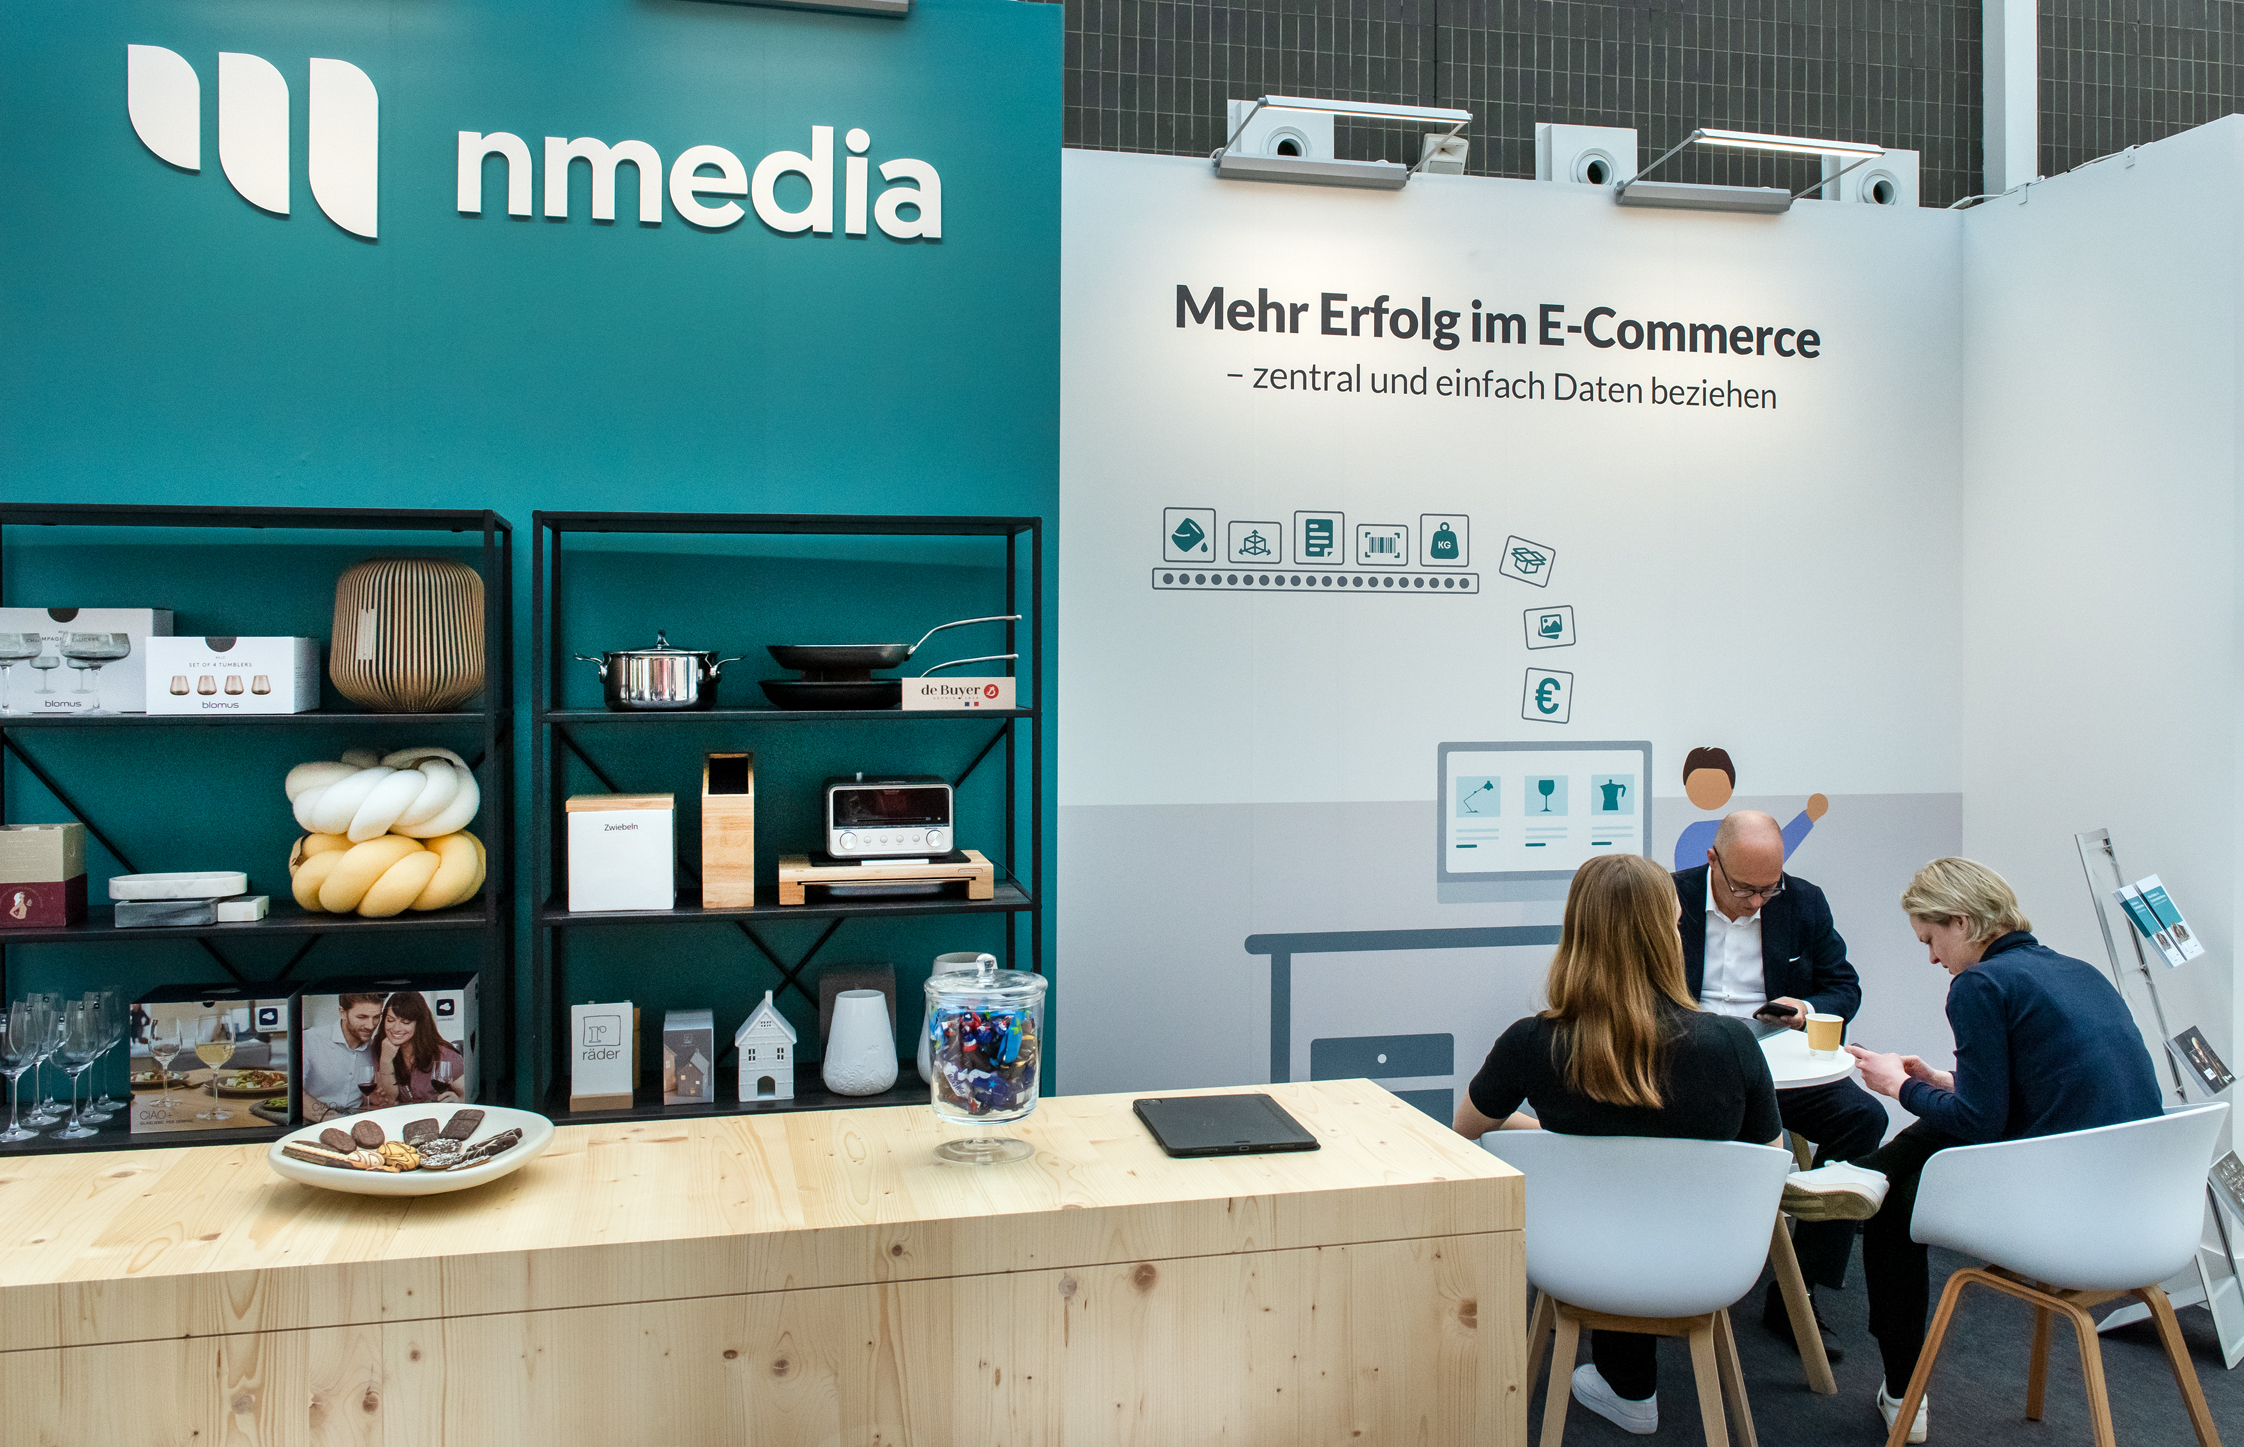 The order and content platform nmedia presents new online solutions for industry and trade at Nordstil